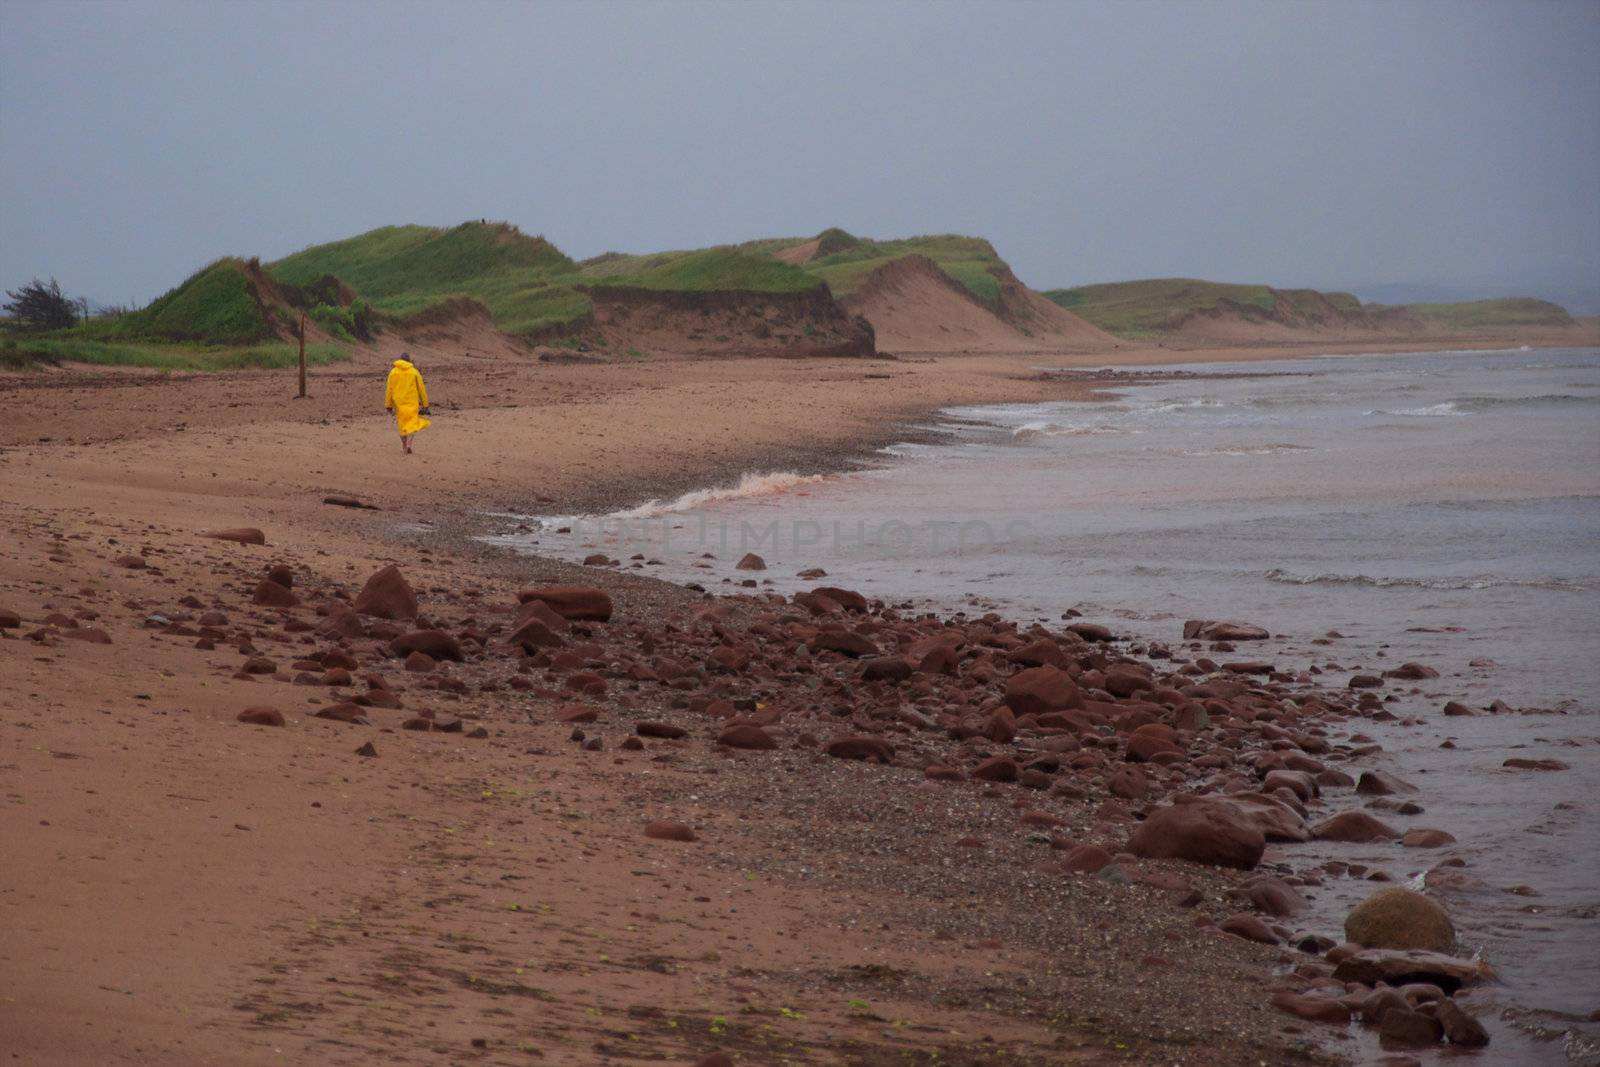 A solitary figure takes a walk on Cavendish Beach on an overcast day.